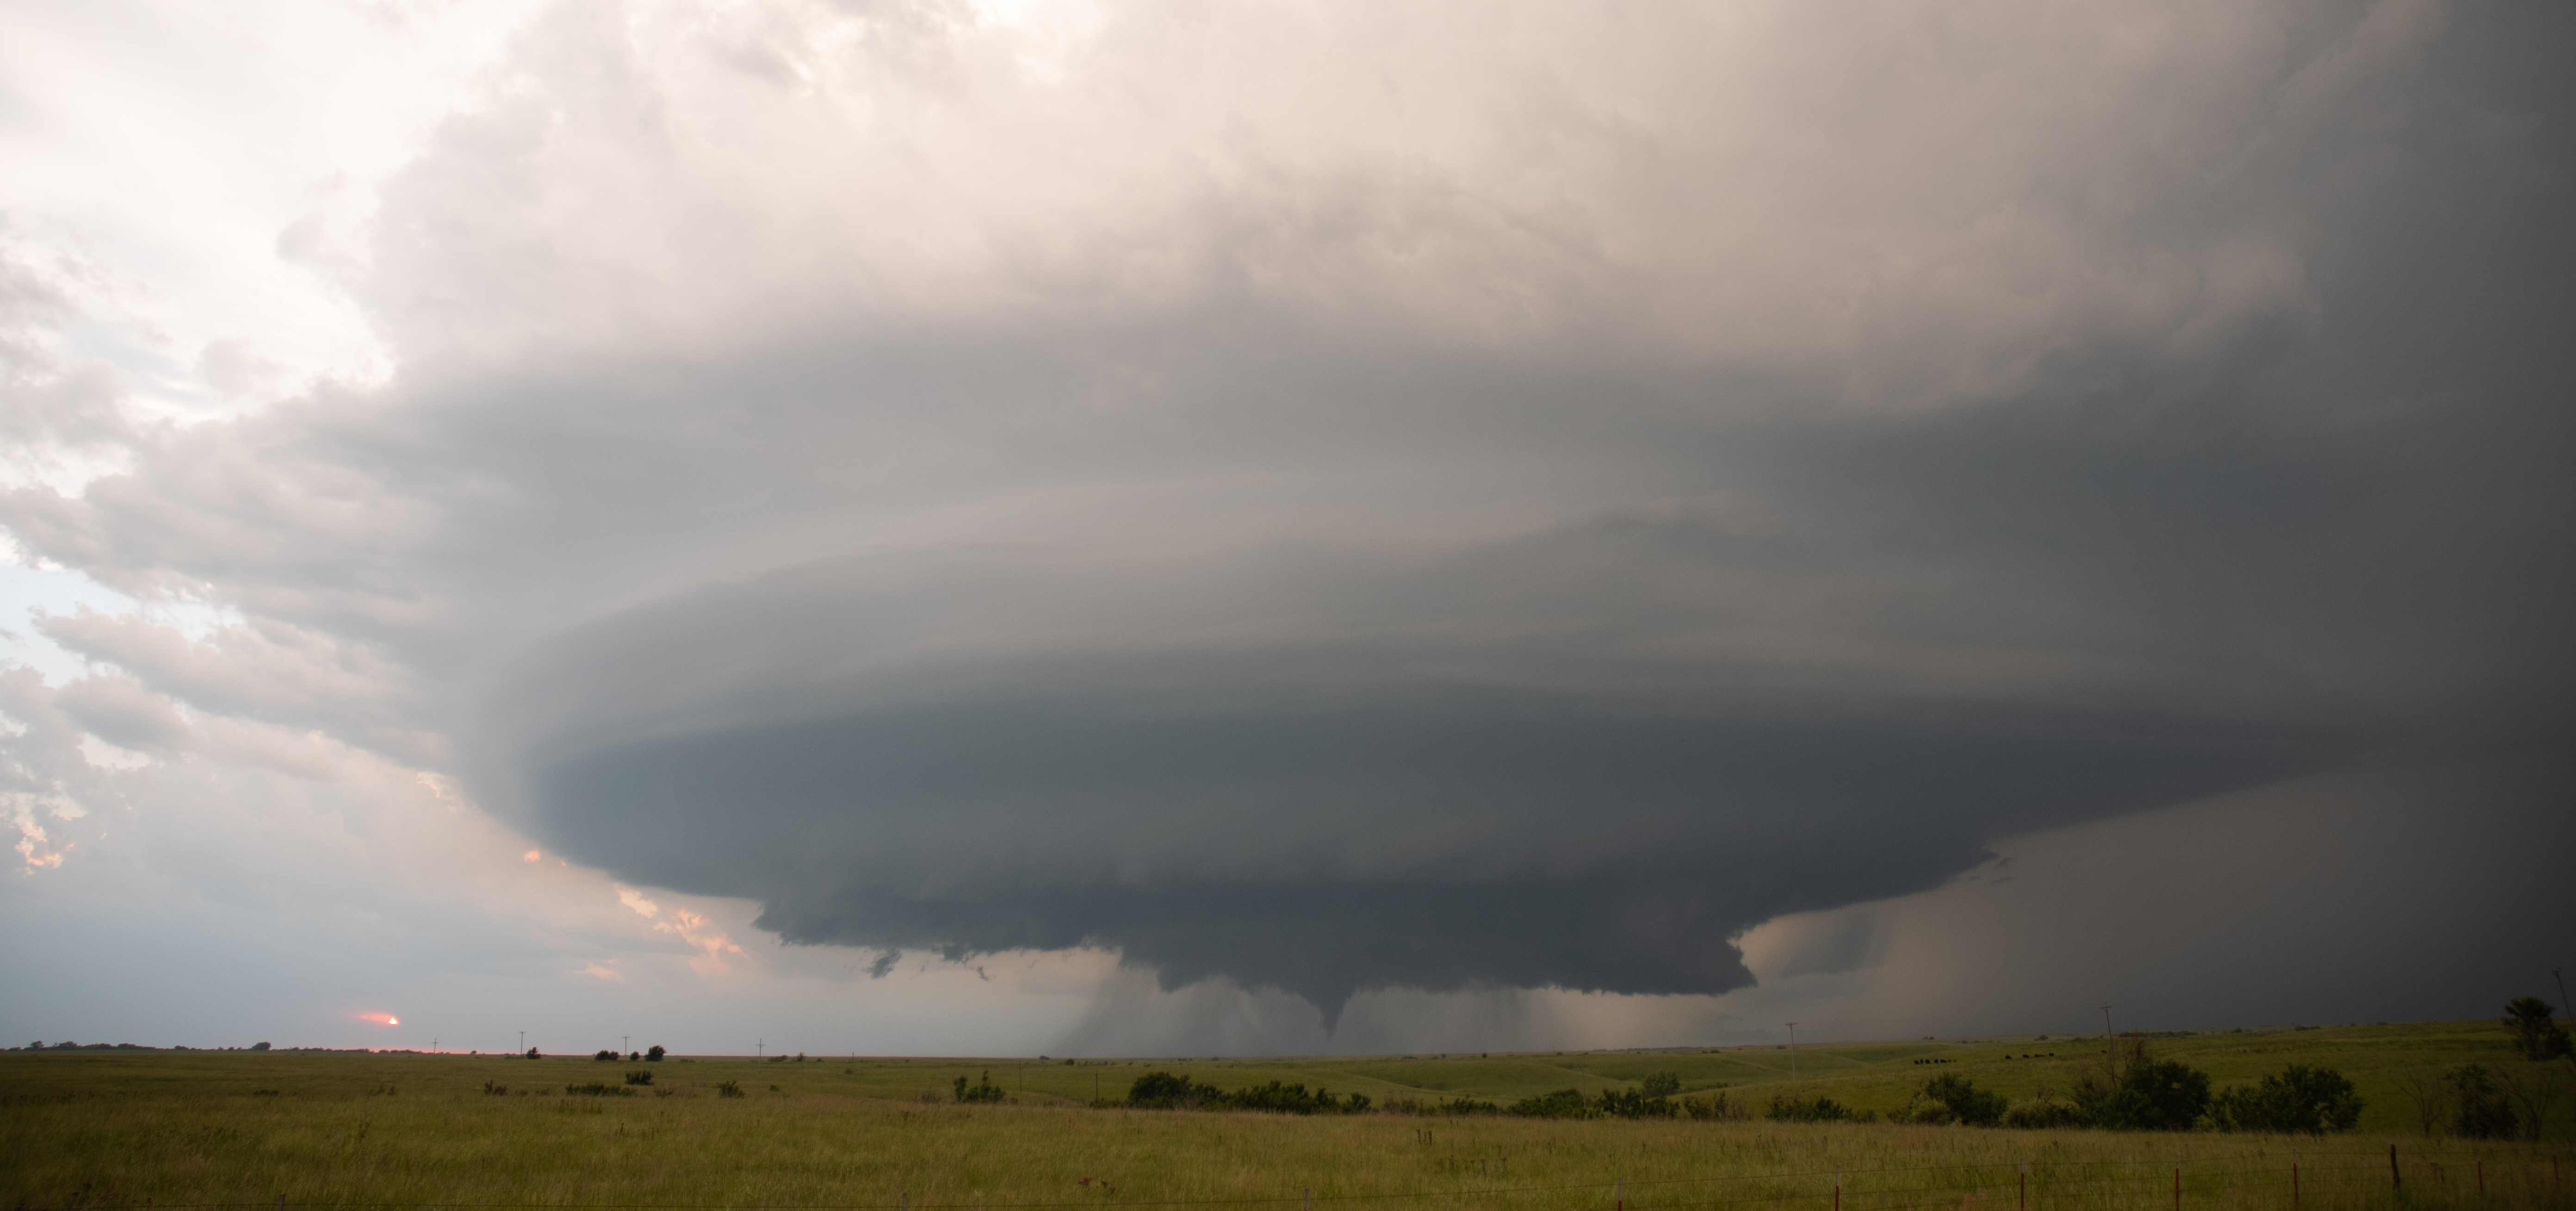 Supercell and Tornado_1